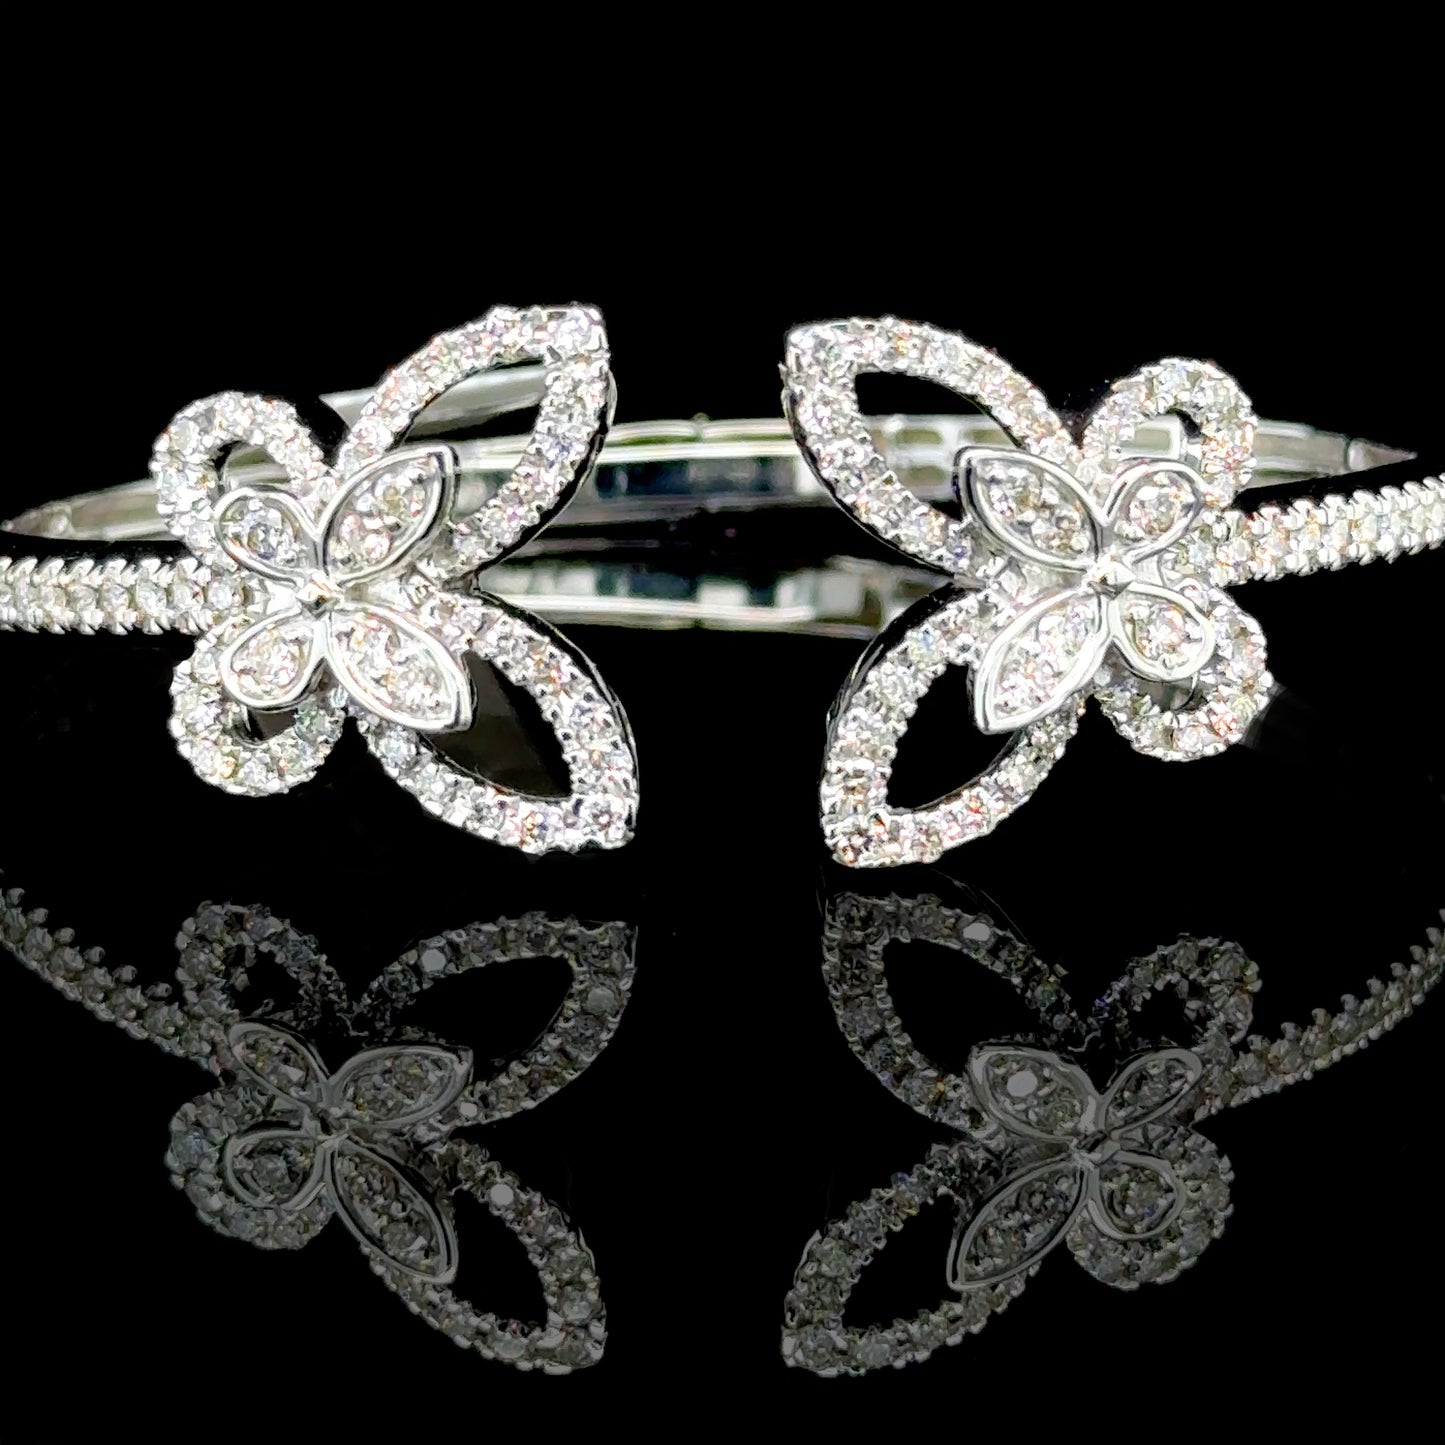 White gold butterfly bangle featuring 1.64 carats of diamonds